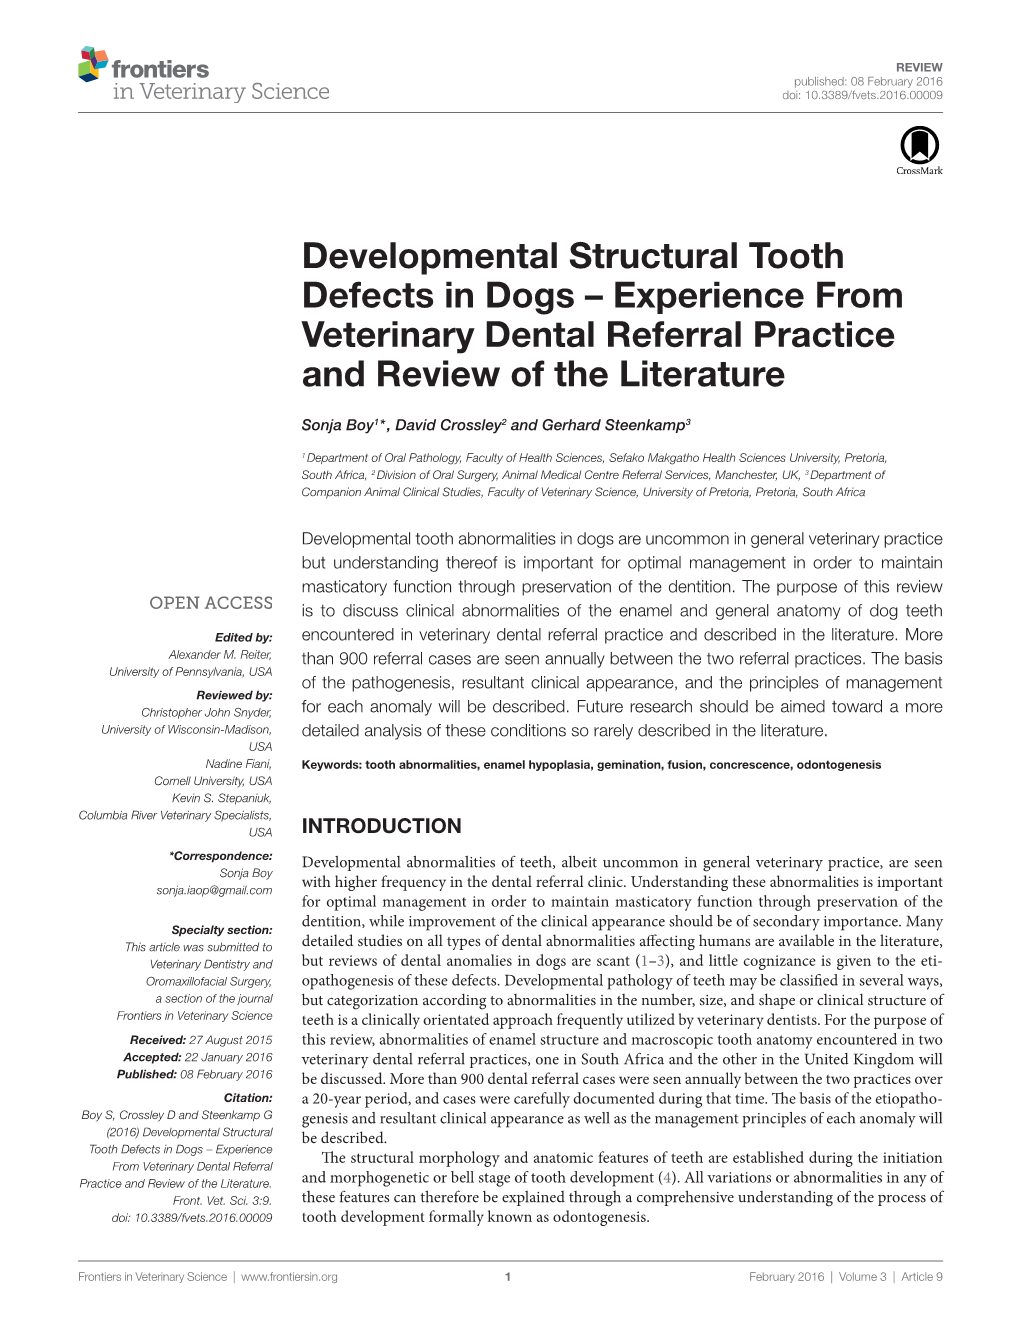 Developmental Structural Tooth Defects in Dogs – Experience from Veterinary Dental Referral Practice and Review of the Literature